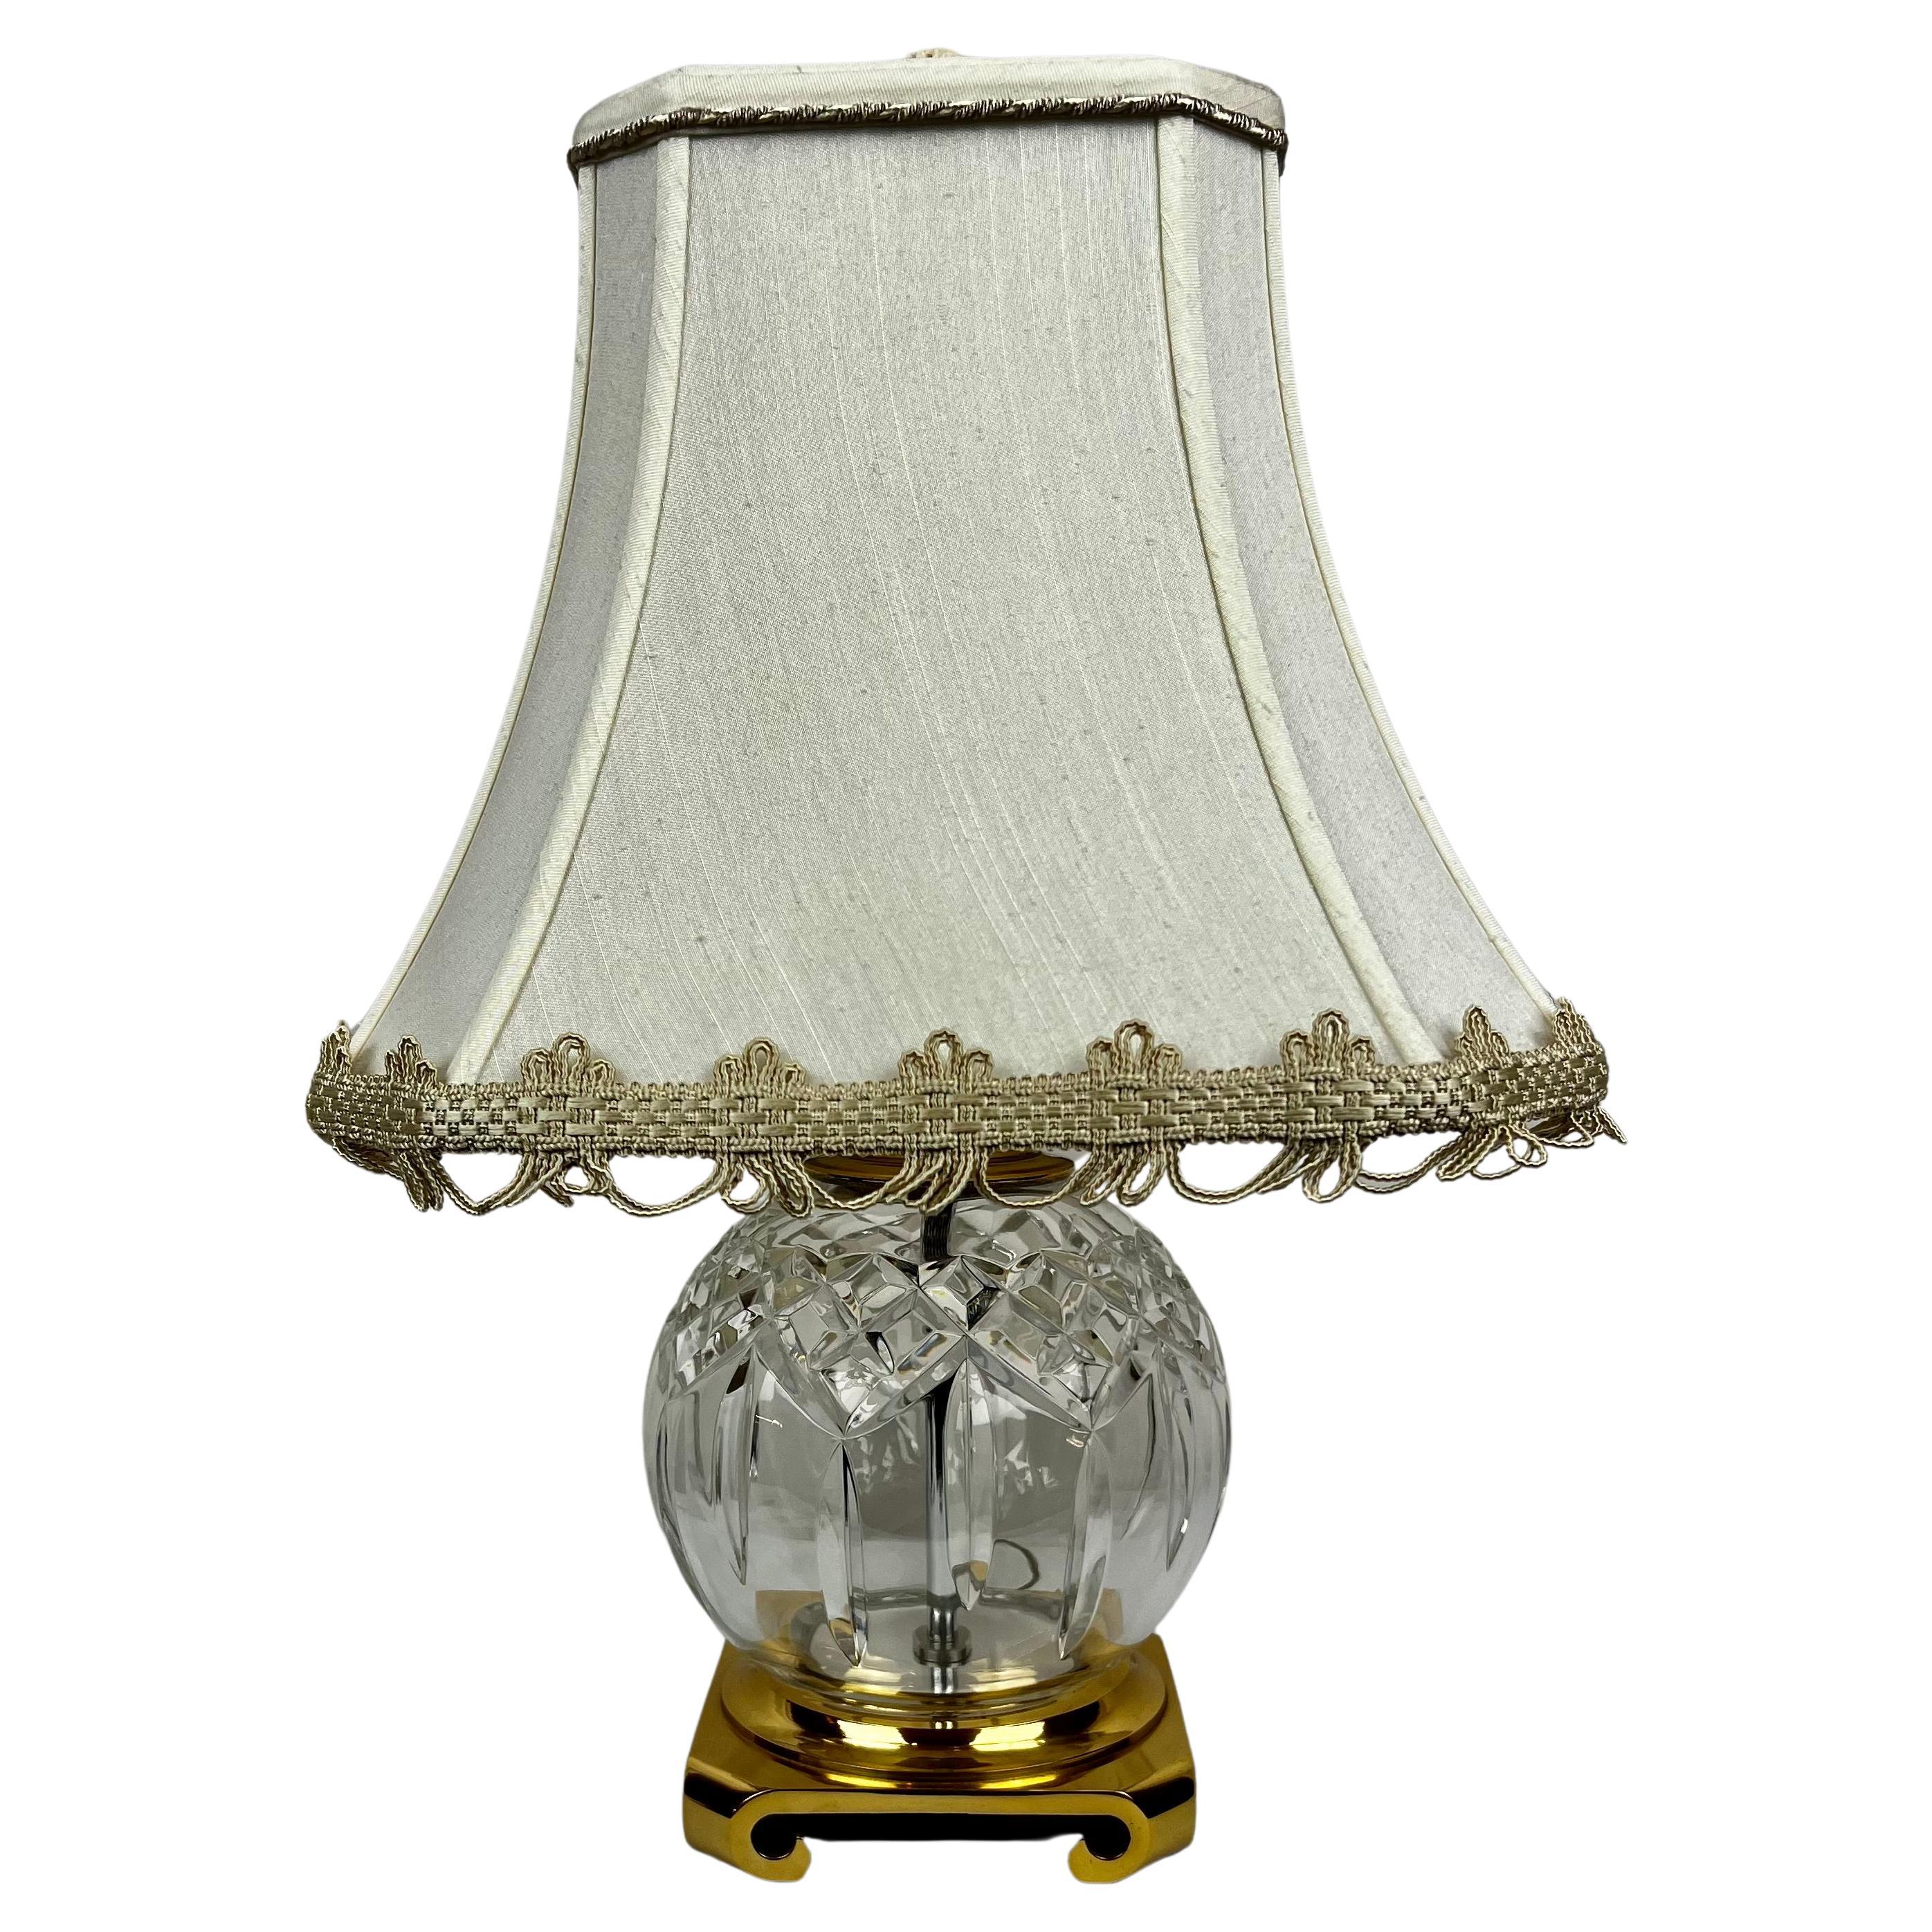 Waterford “Lismore” Round Cut Crystal Table Lamp-Customized Shade, Brass Base